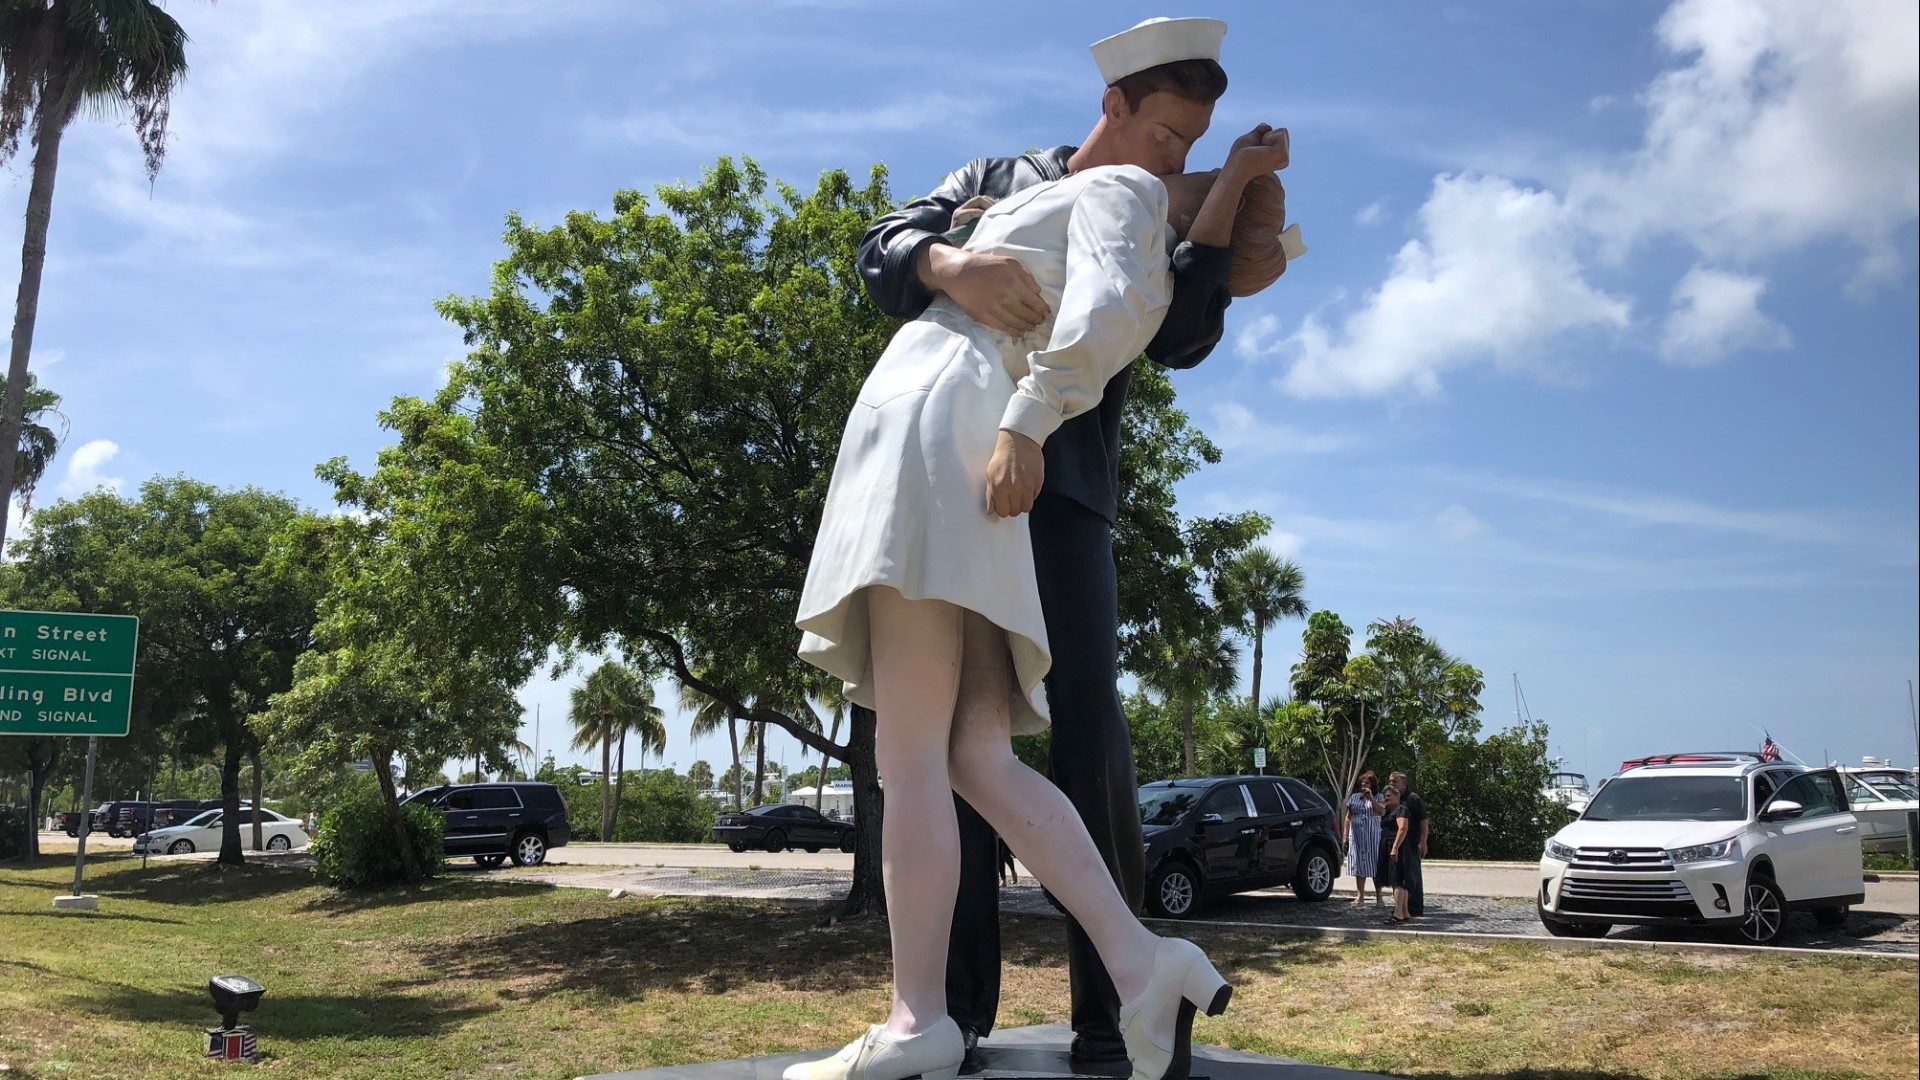 The city decided what to do with the 26-foot tall “Unconditional Surrender” sculpture to make room for a new roundabout.